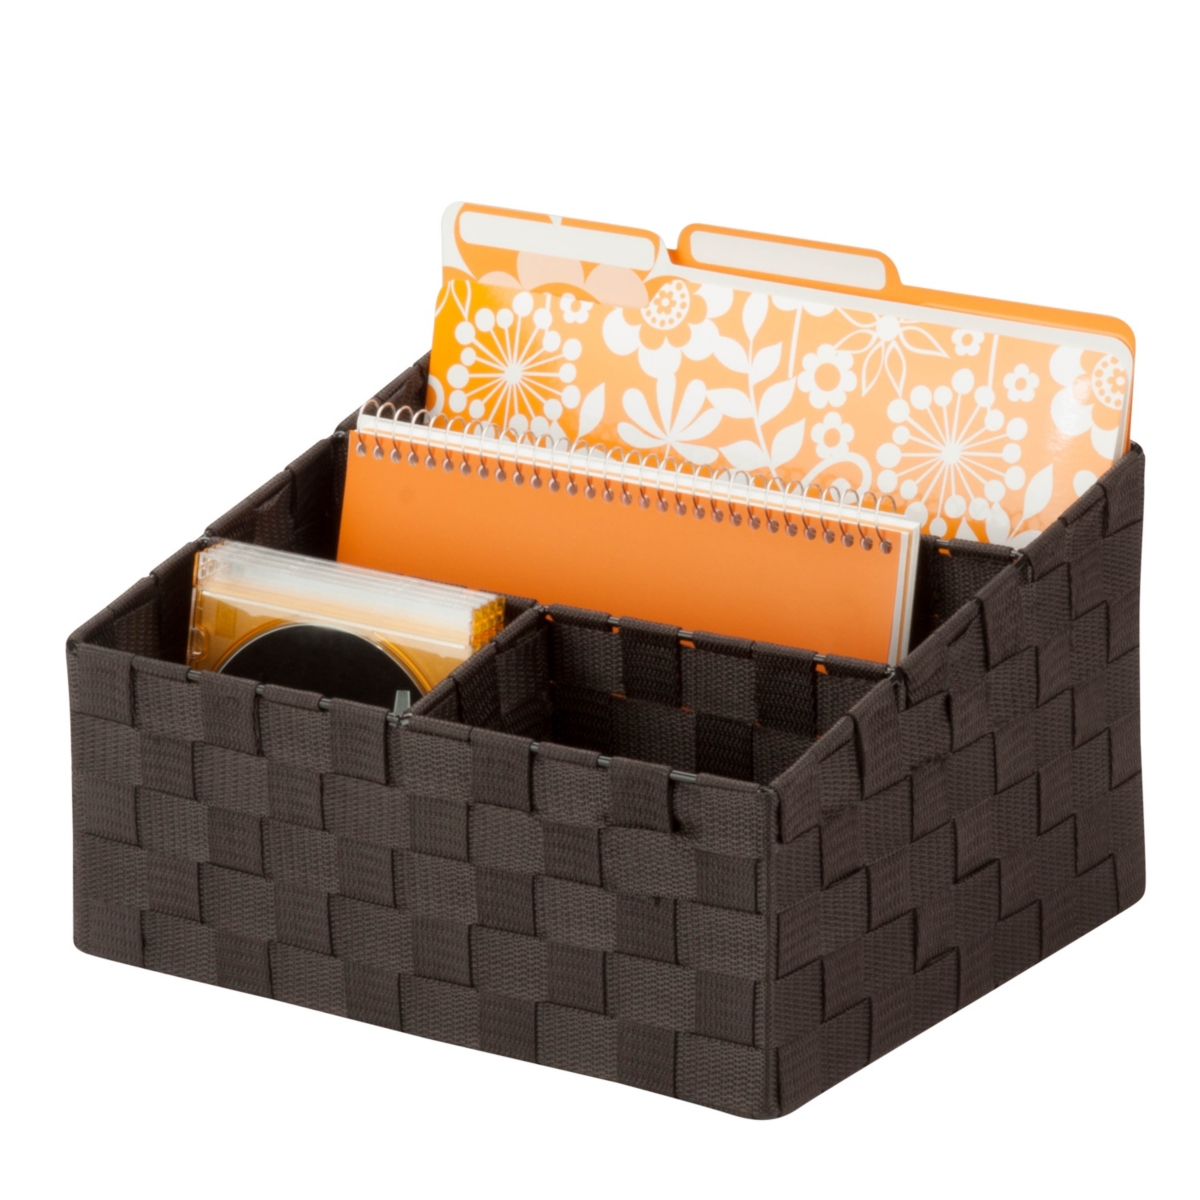 Mail and File Desk Organizer - Brown